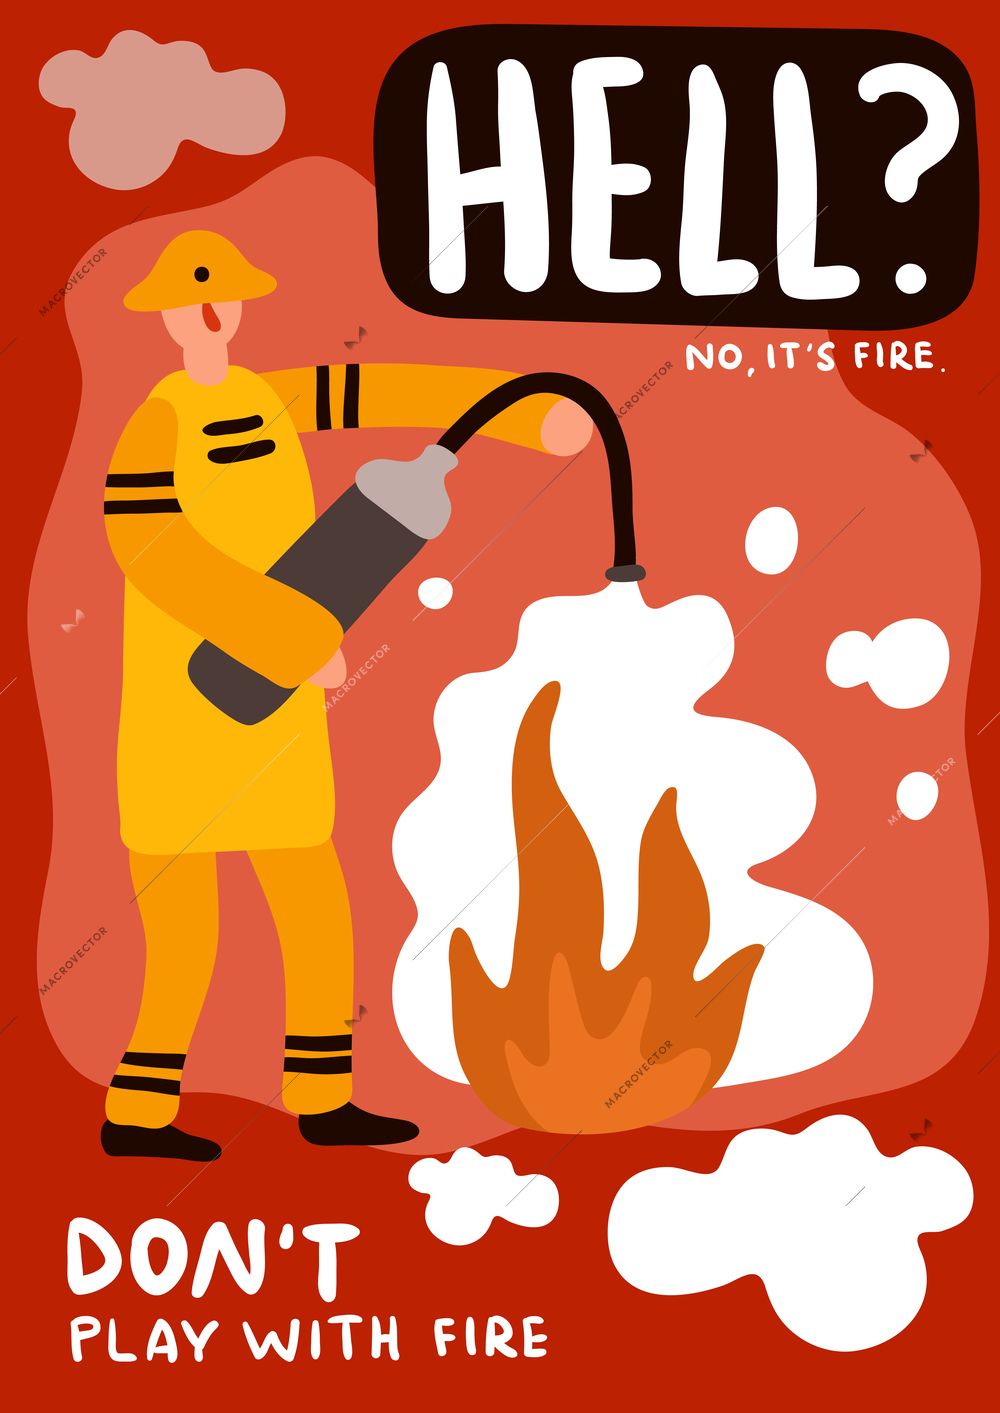 Fireman with extinguisher during fire fighting poster on red background flat vector illustration